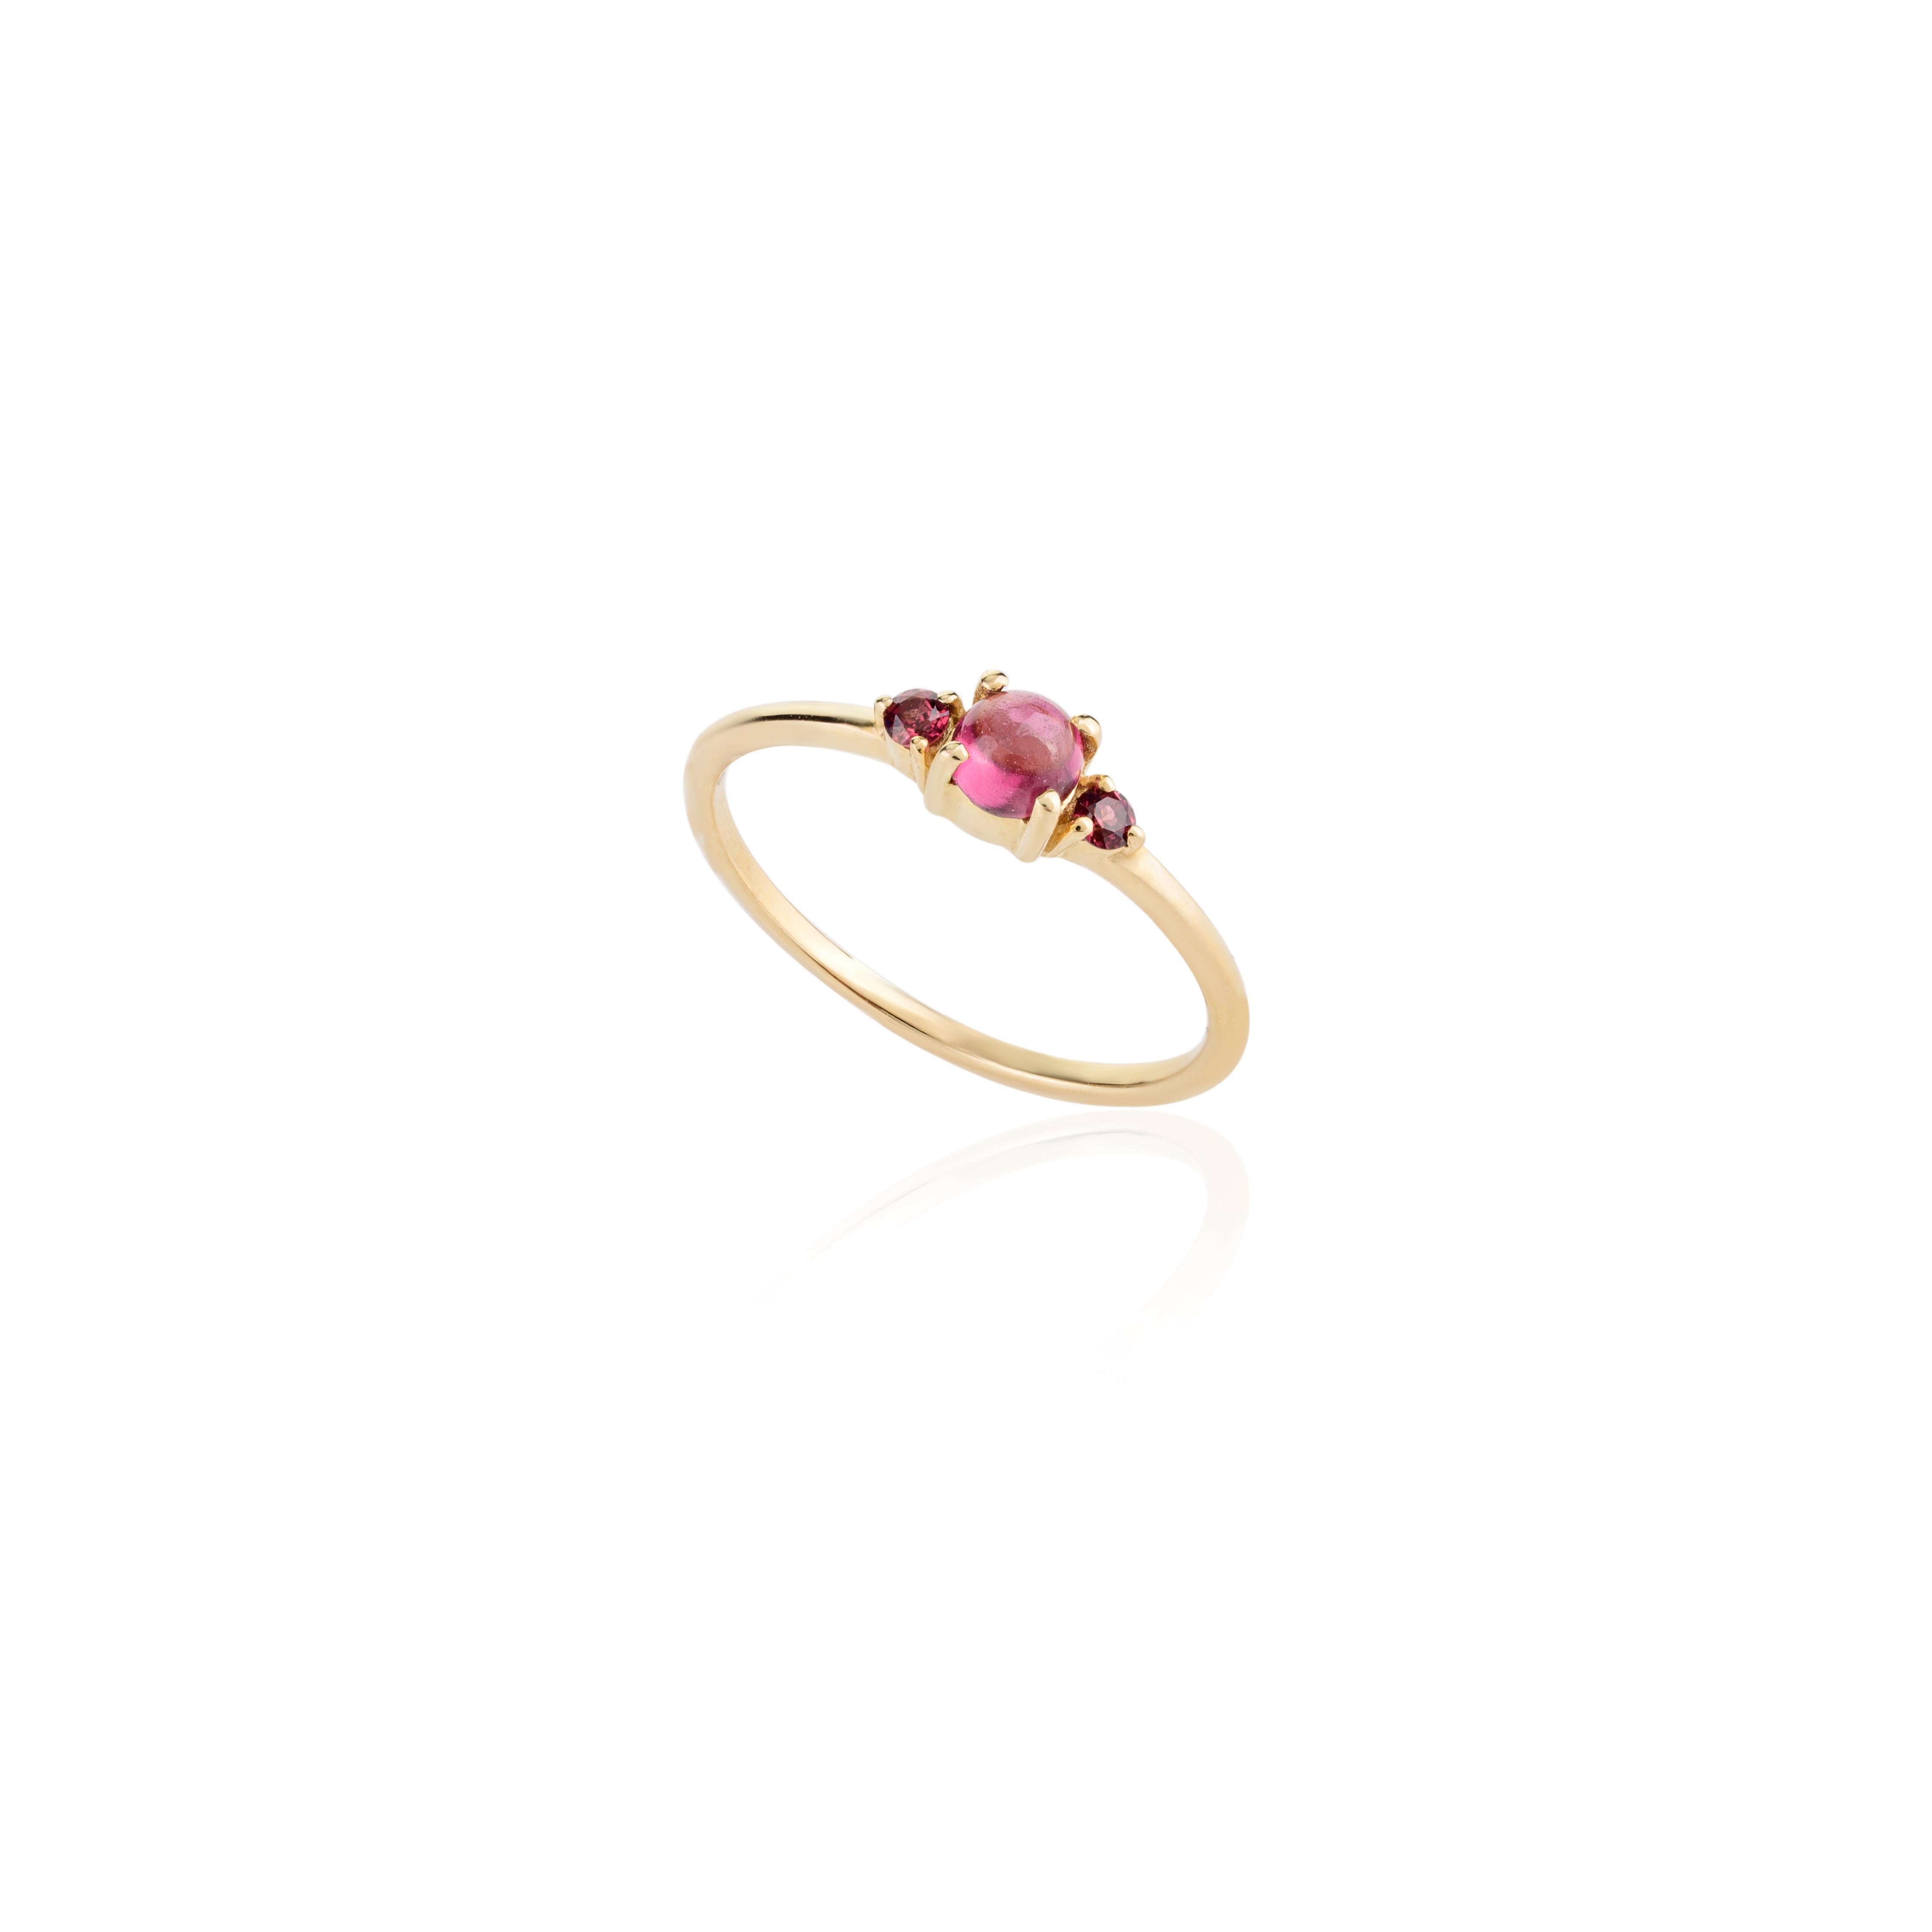 For Sale:  Dainty Three Stone Garnet Ring 14k Solid Yellow Gold Promise Ring for Her 8